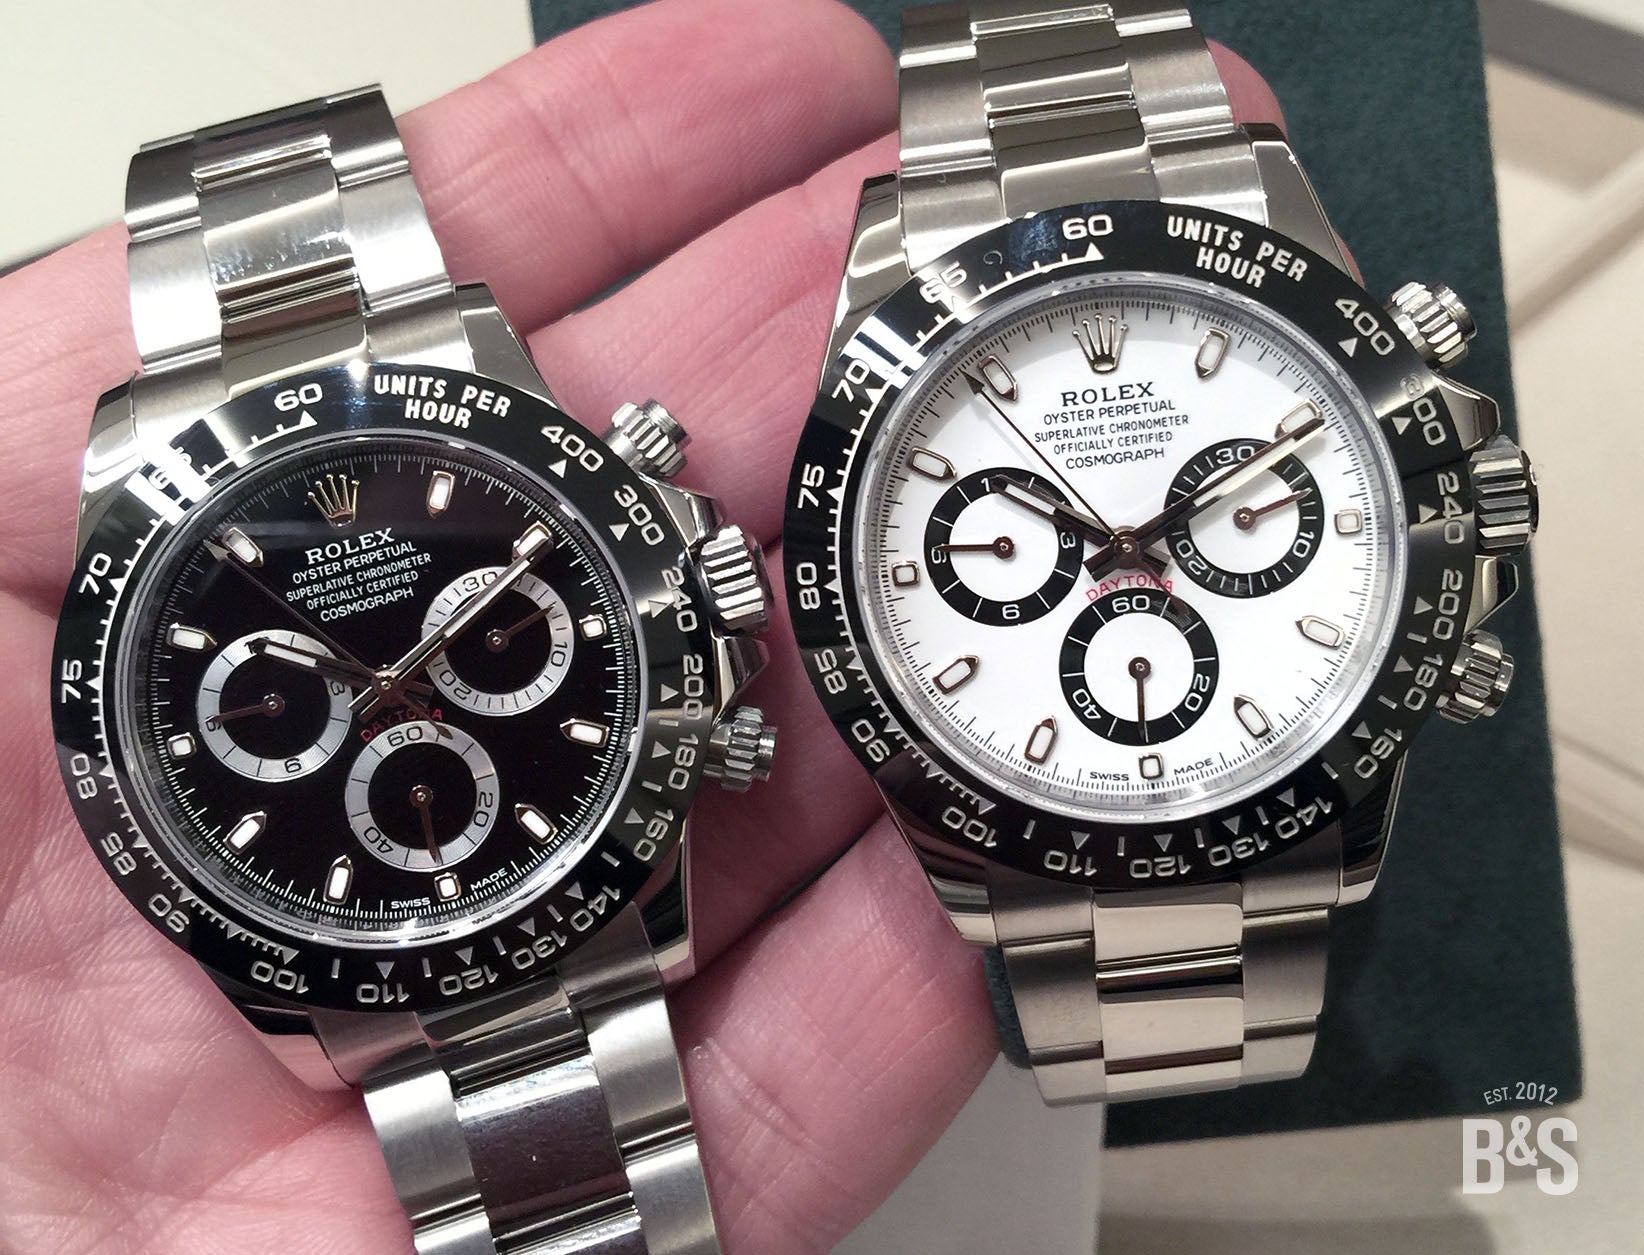 The New Rolex Daytona 116500 LN with ceramic bezel in black and white.